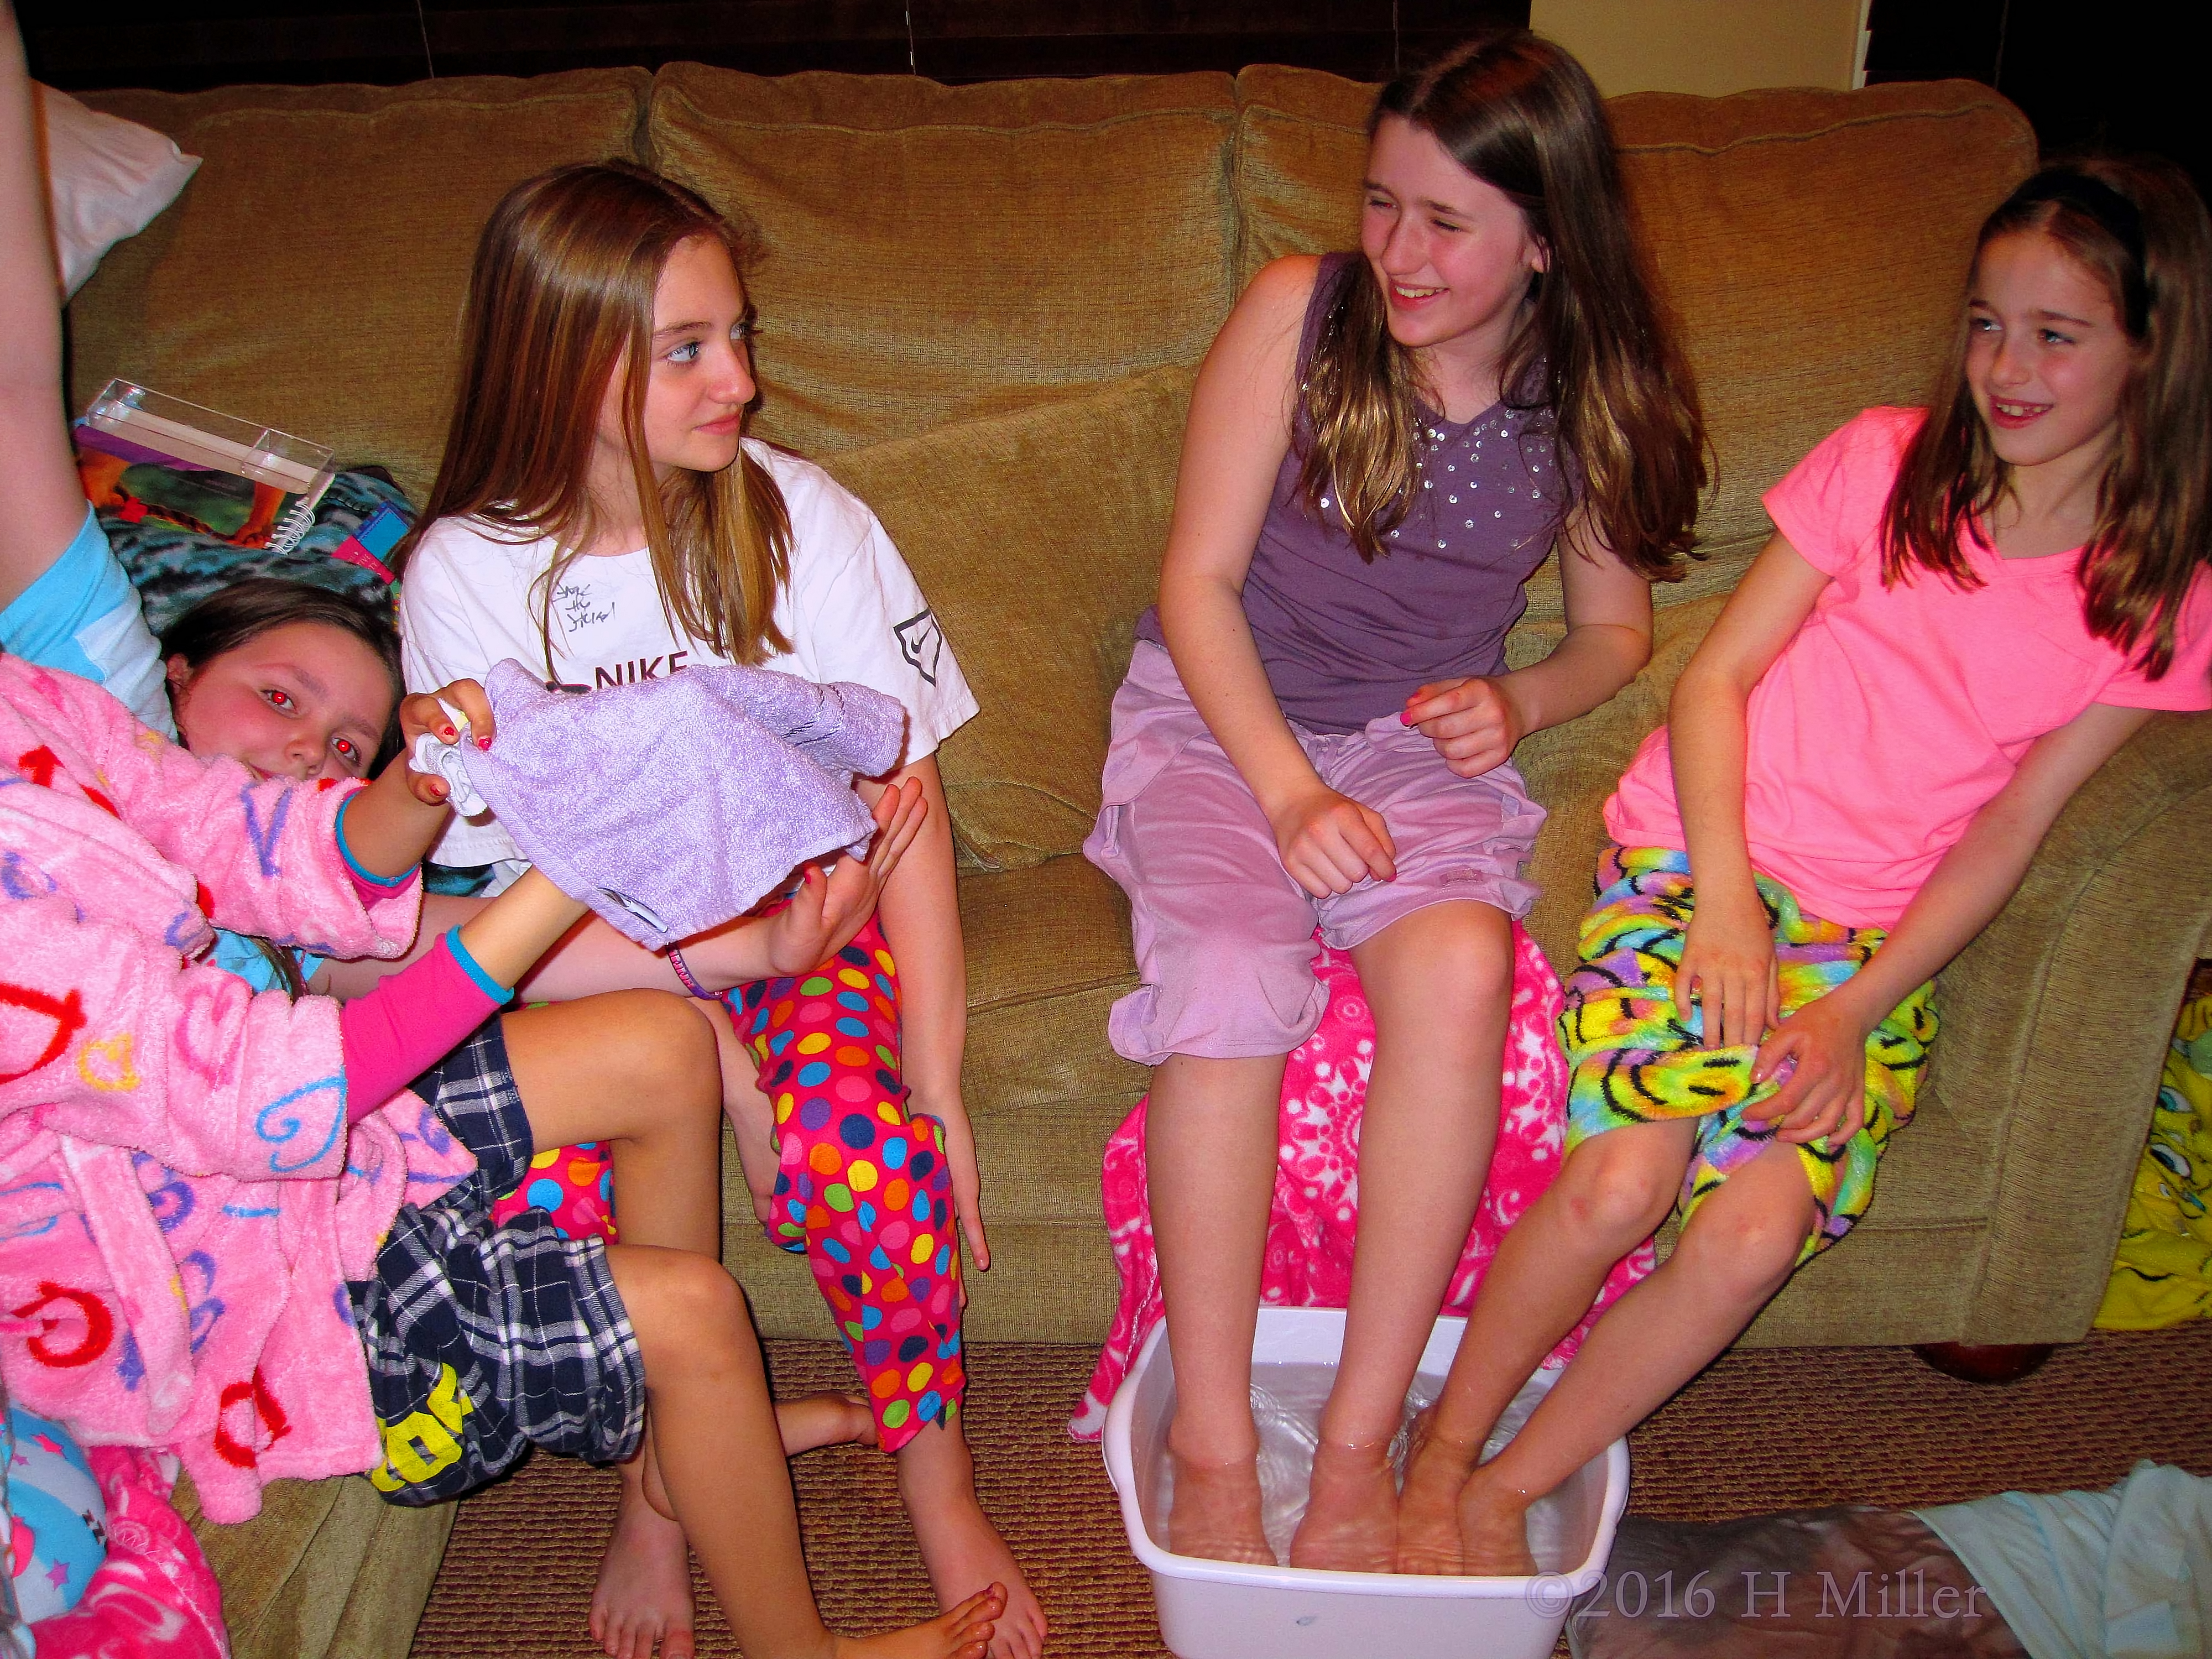 Kids Enjoy The Pedicure At The Girls Spa Party!